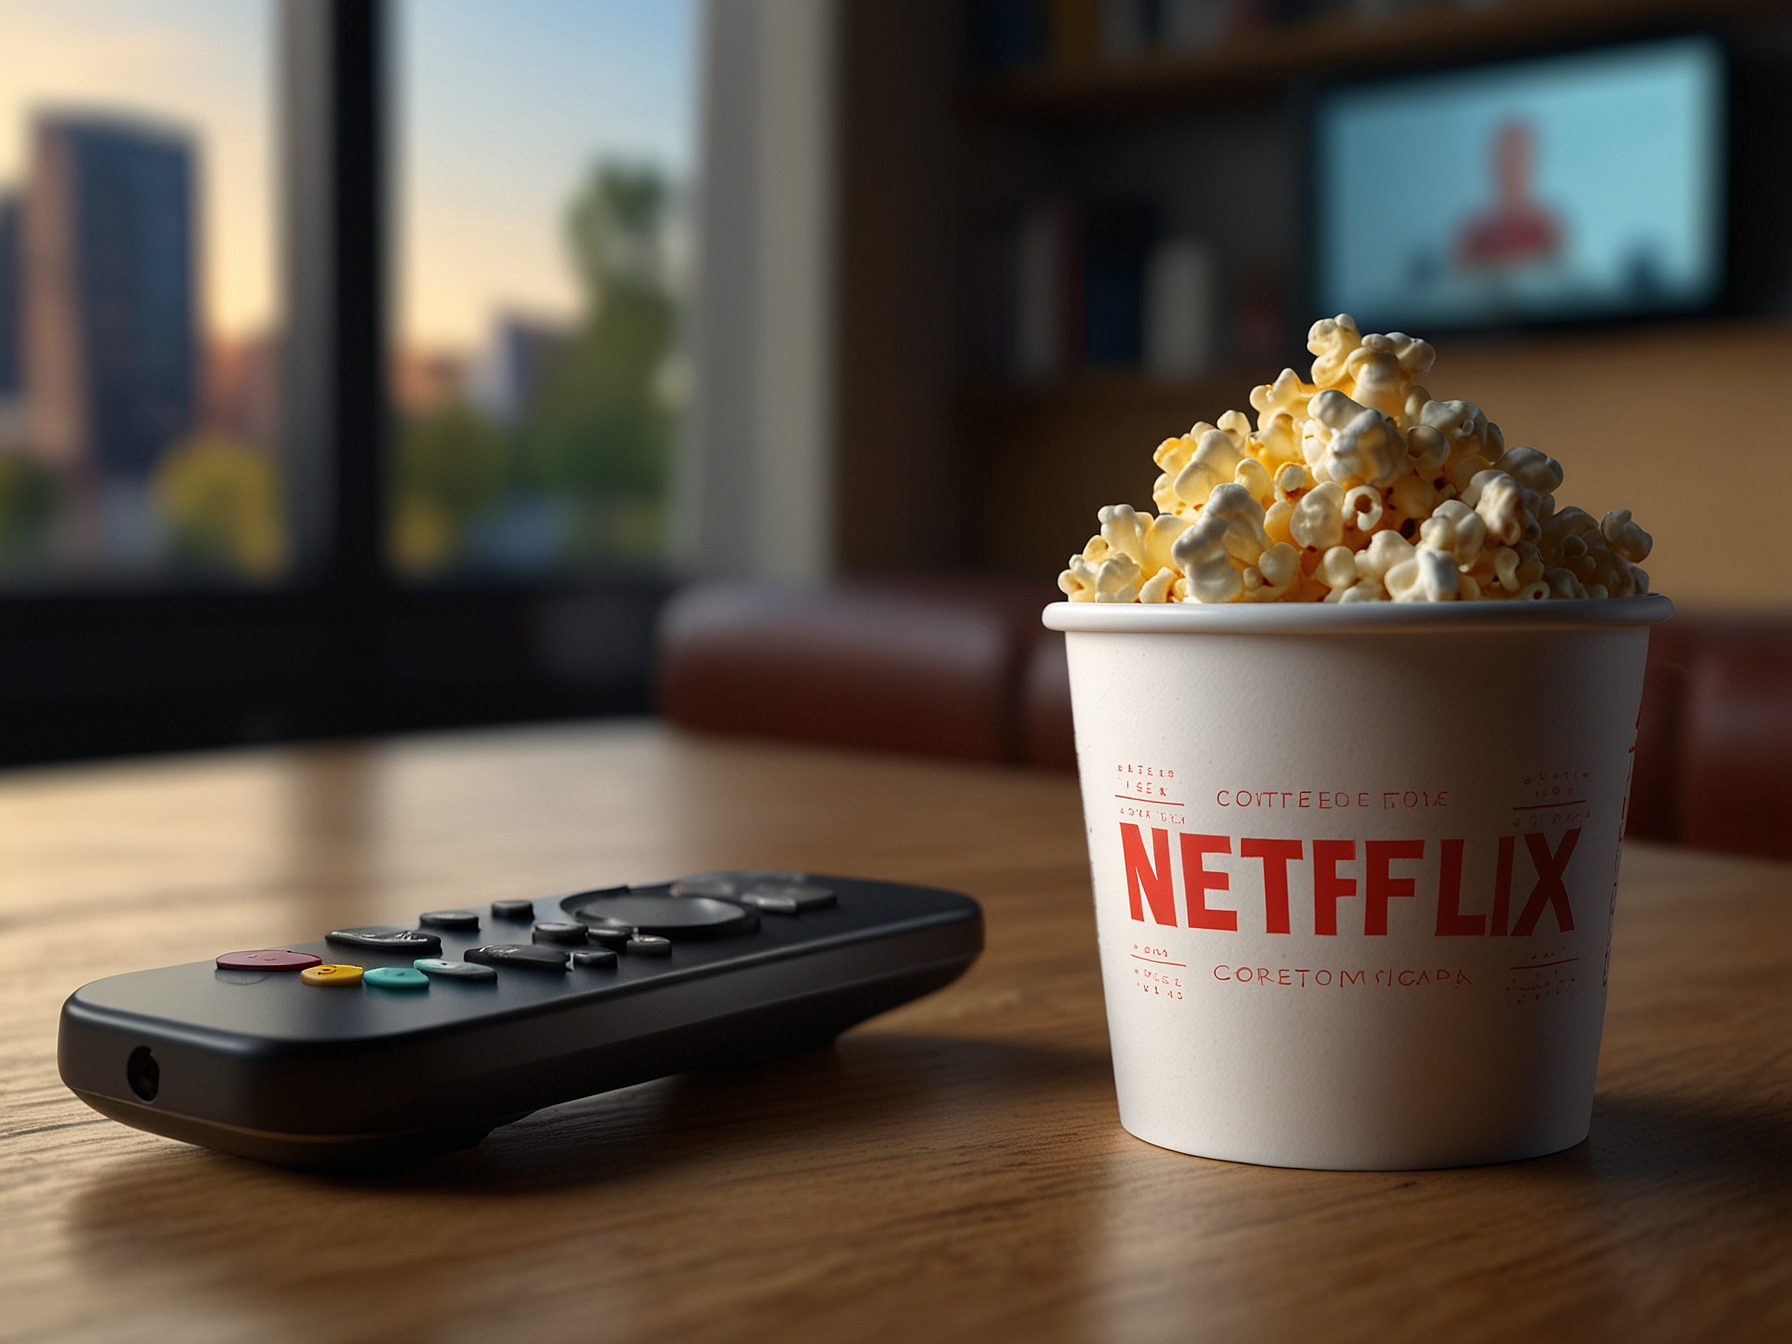 A bag of Netflix: Now Popping premium popcorn resting on a coffee table, surrounded by a remote control and a TV screen displaying the Netflix interface, perfect for movie nights.